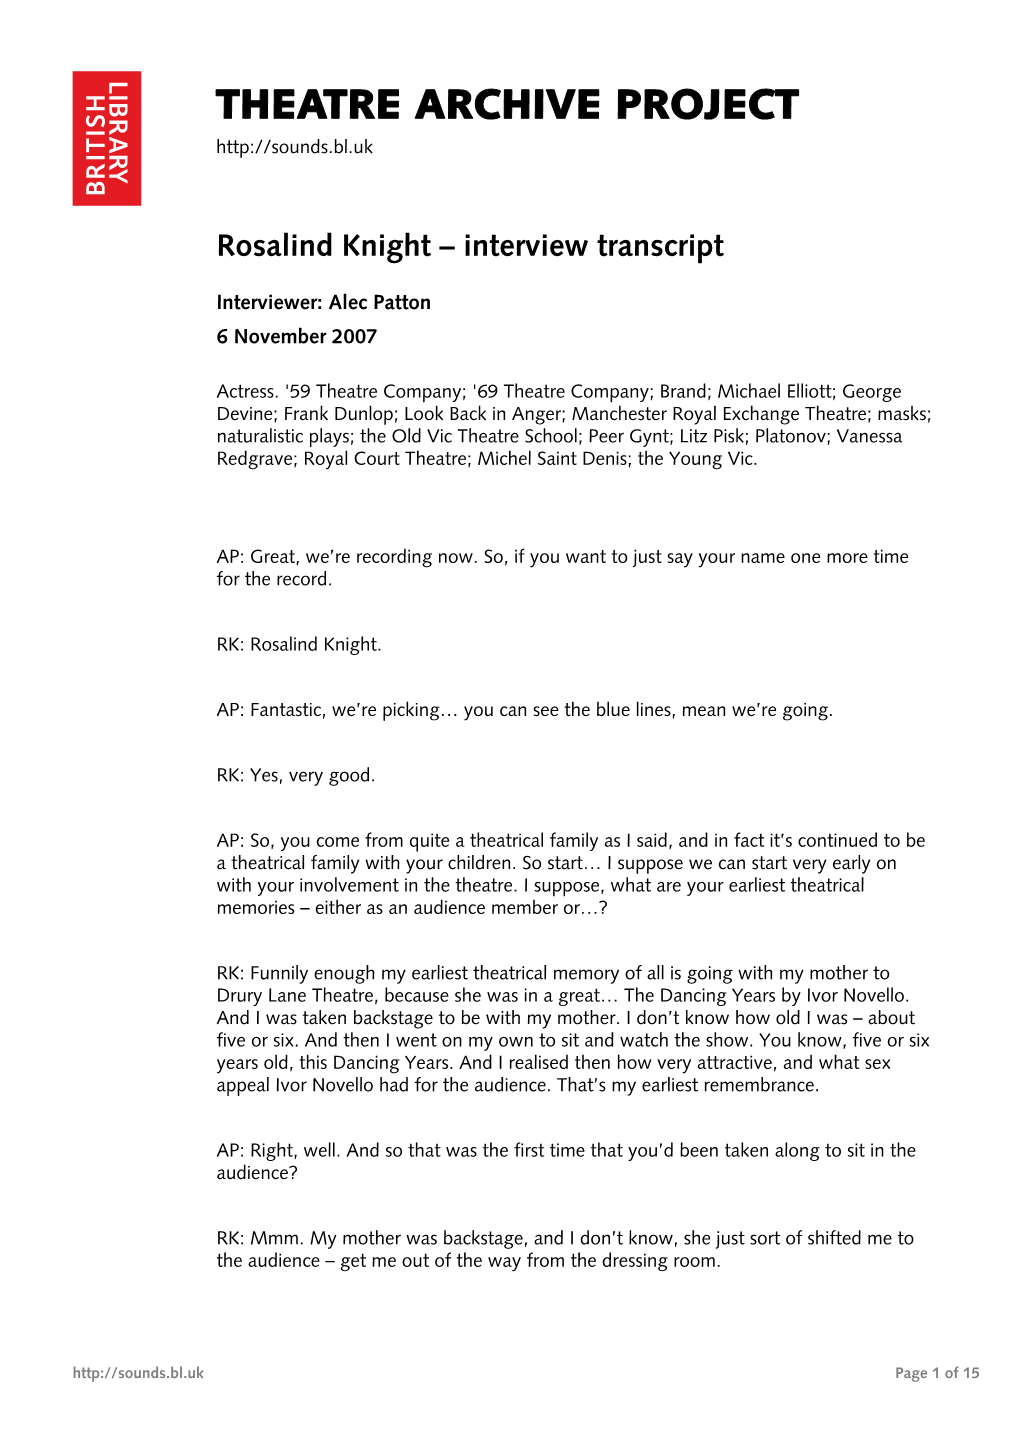 Interview with Rosalind Knight